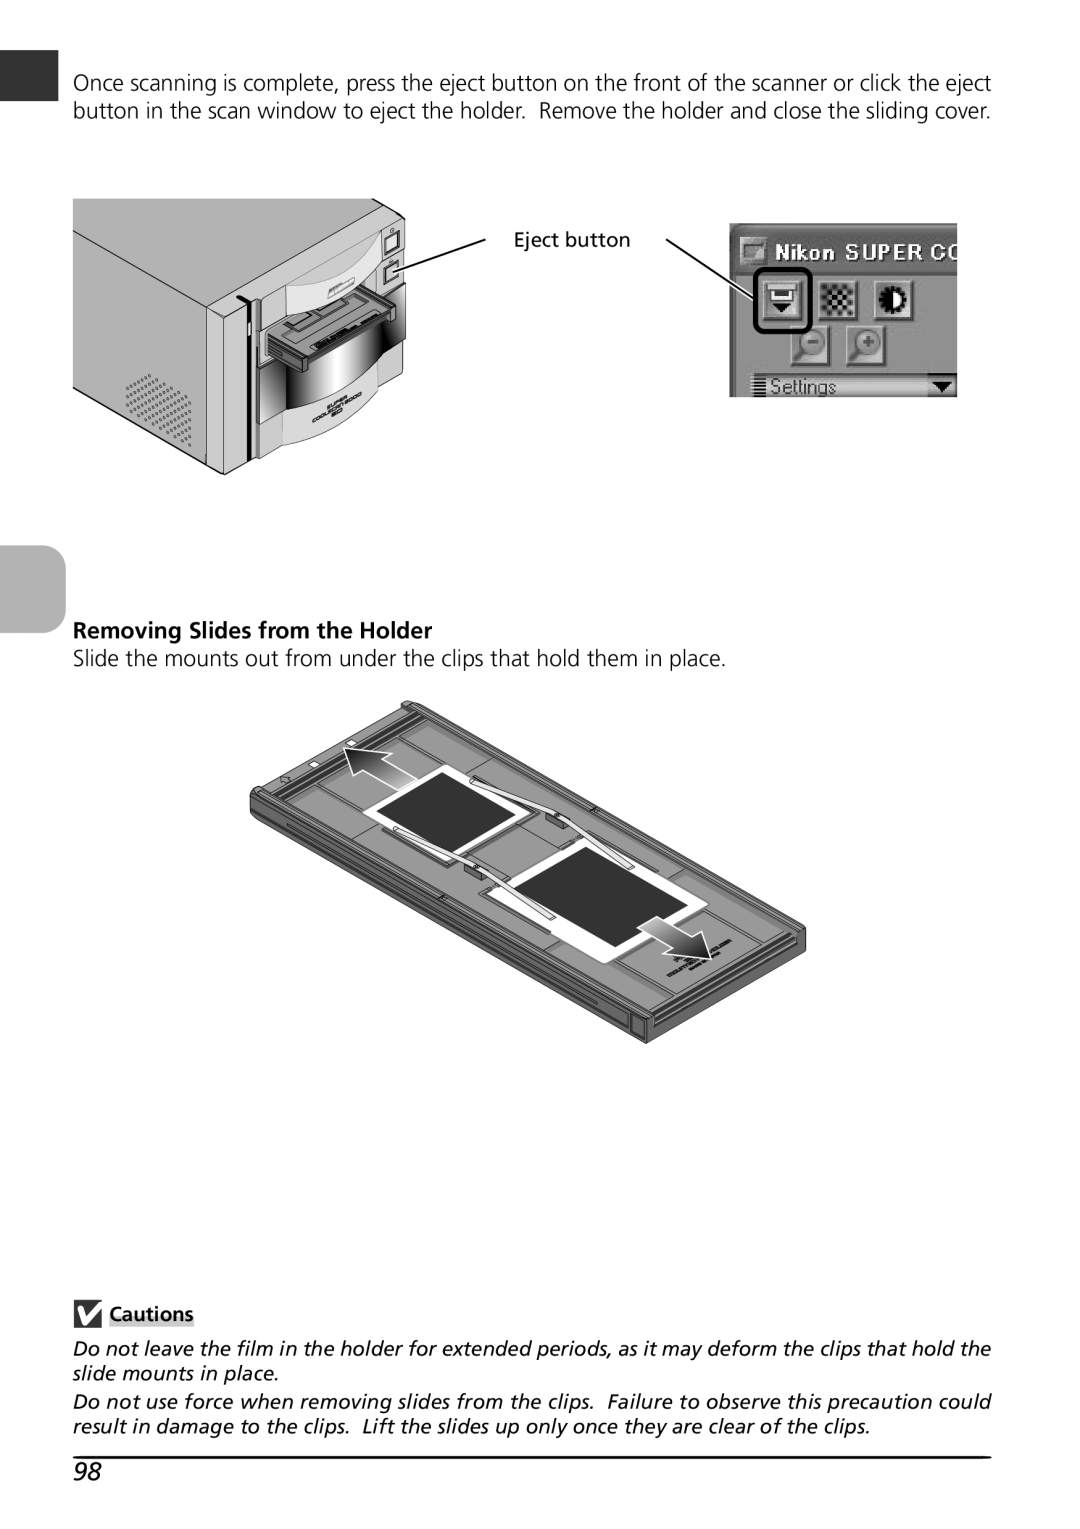 Nikon LS8000 user manual Removing Slides from the Holder, Cautions 